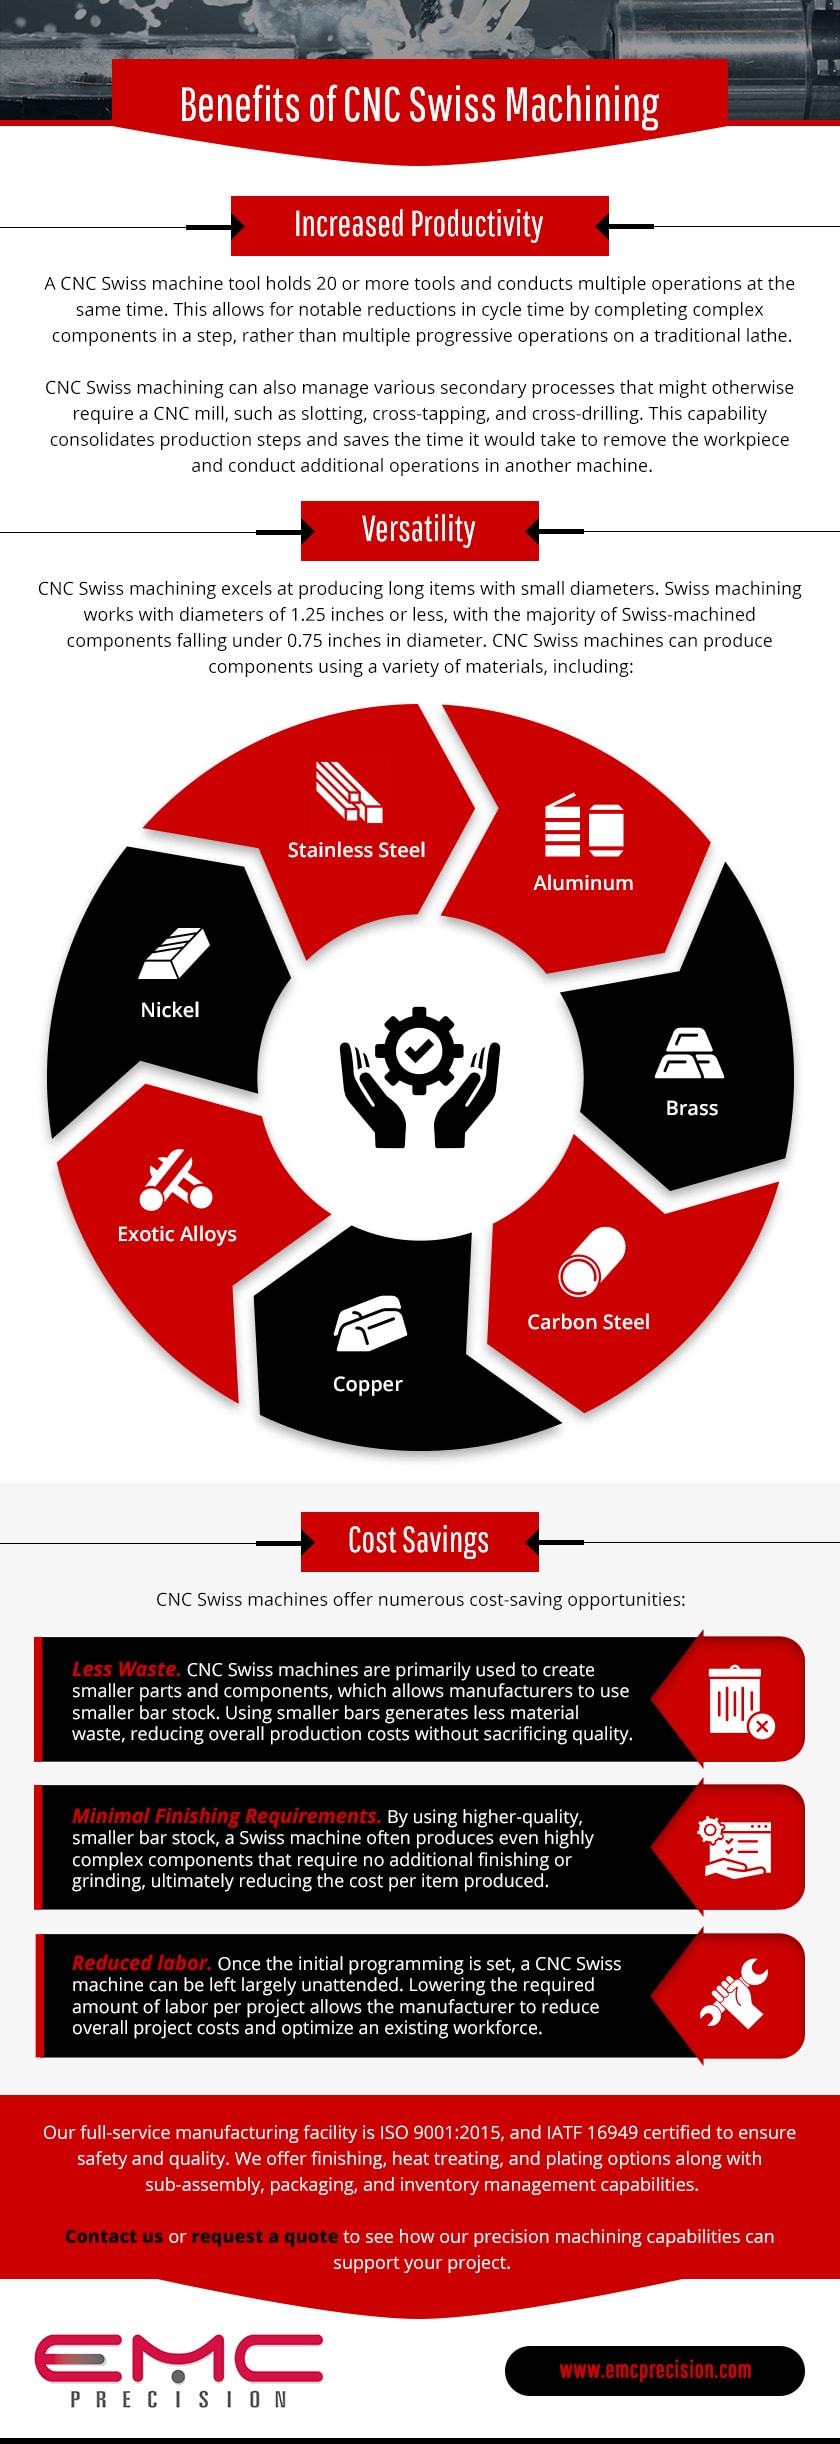 An infographic showing the benefits of CNC swiss machining.